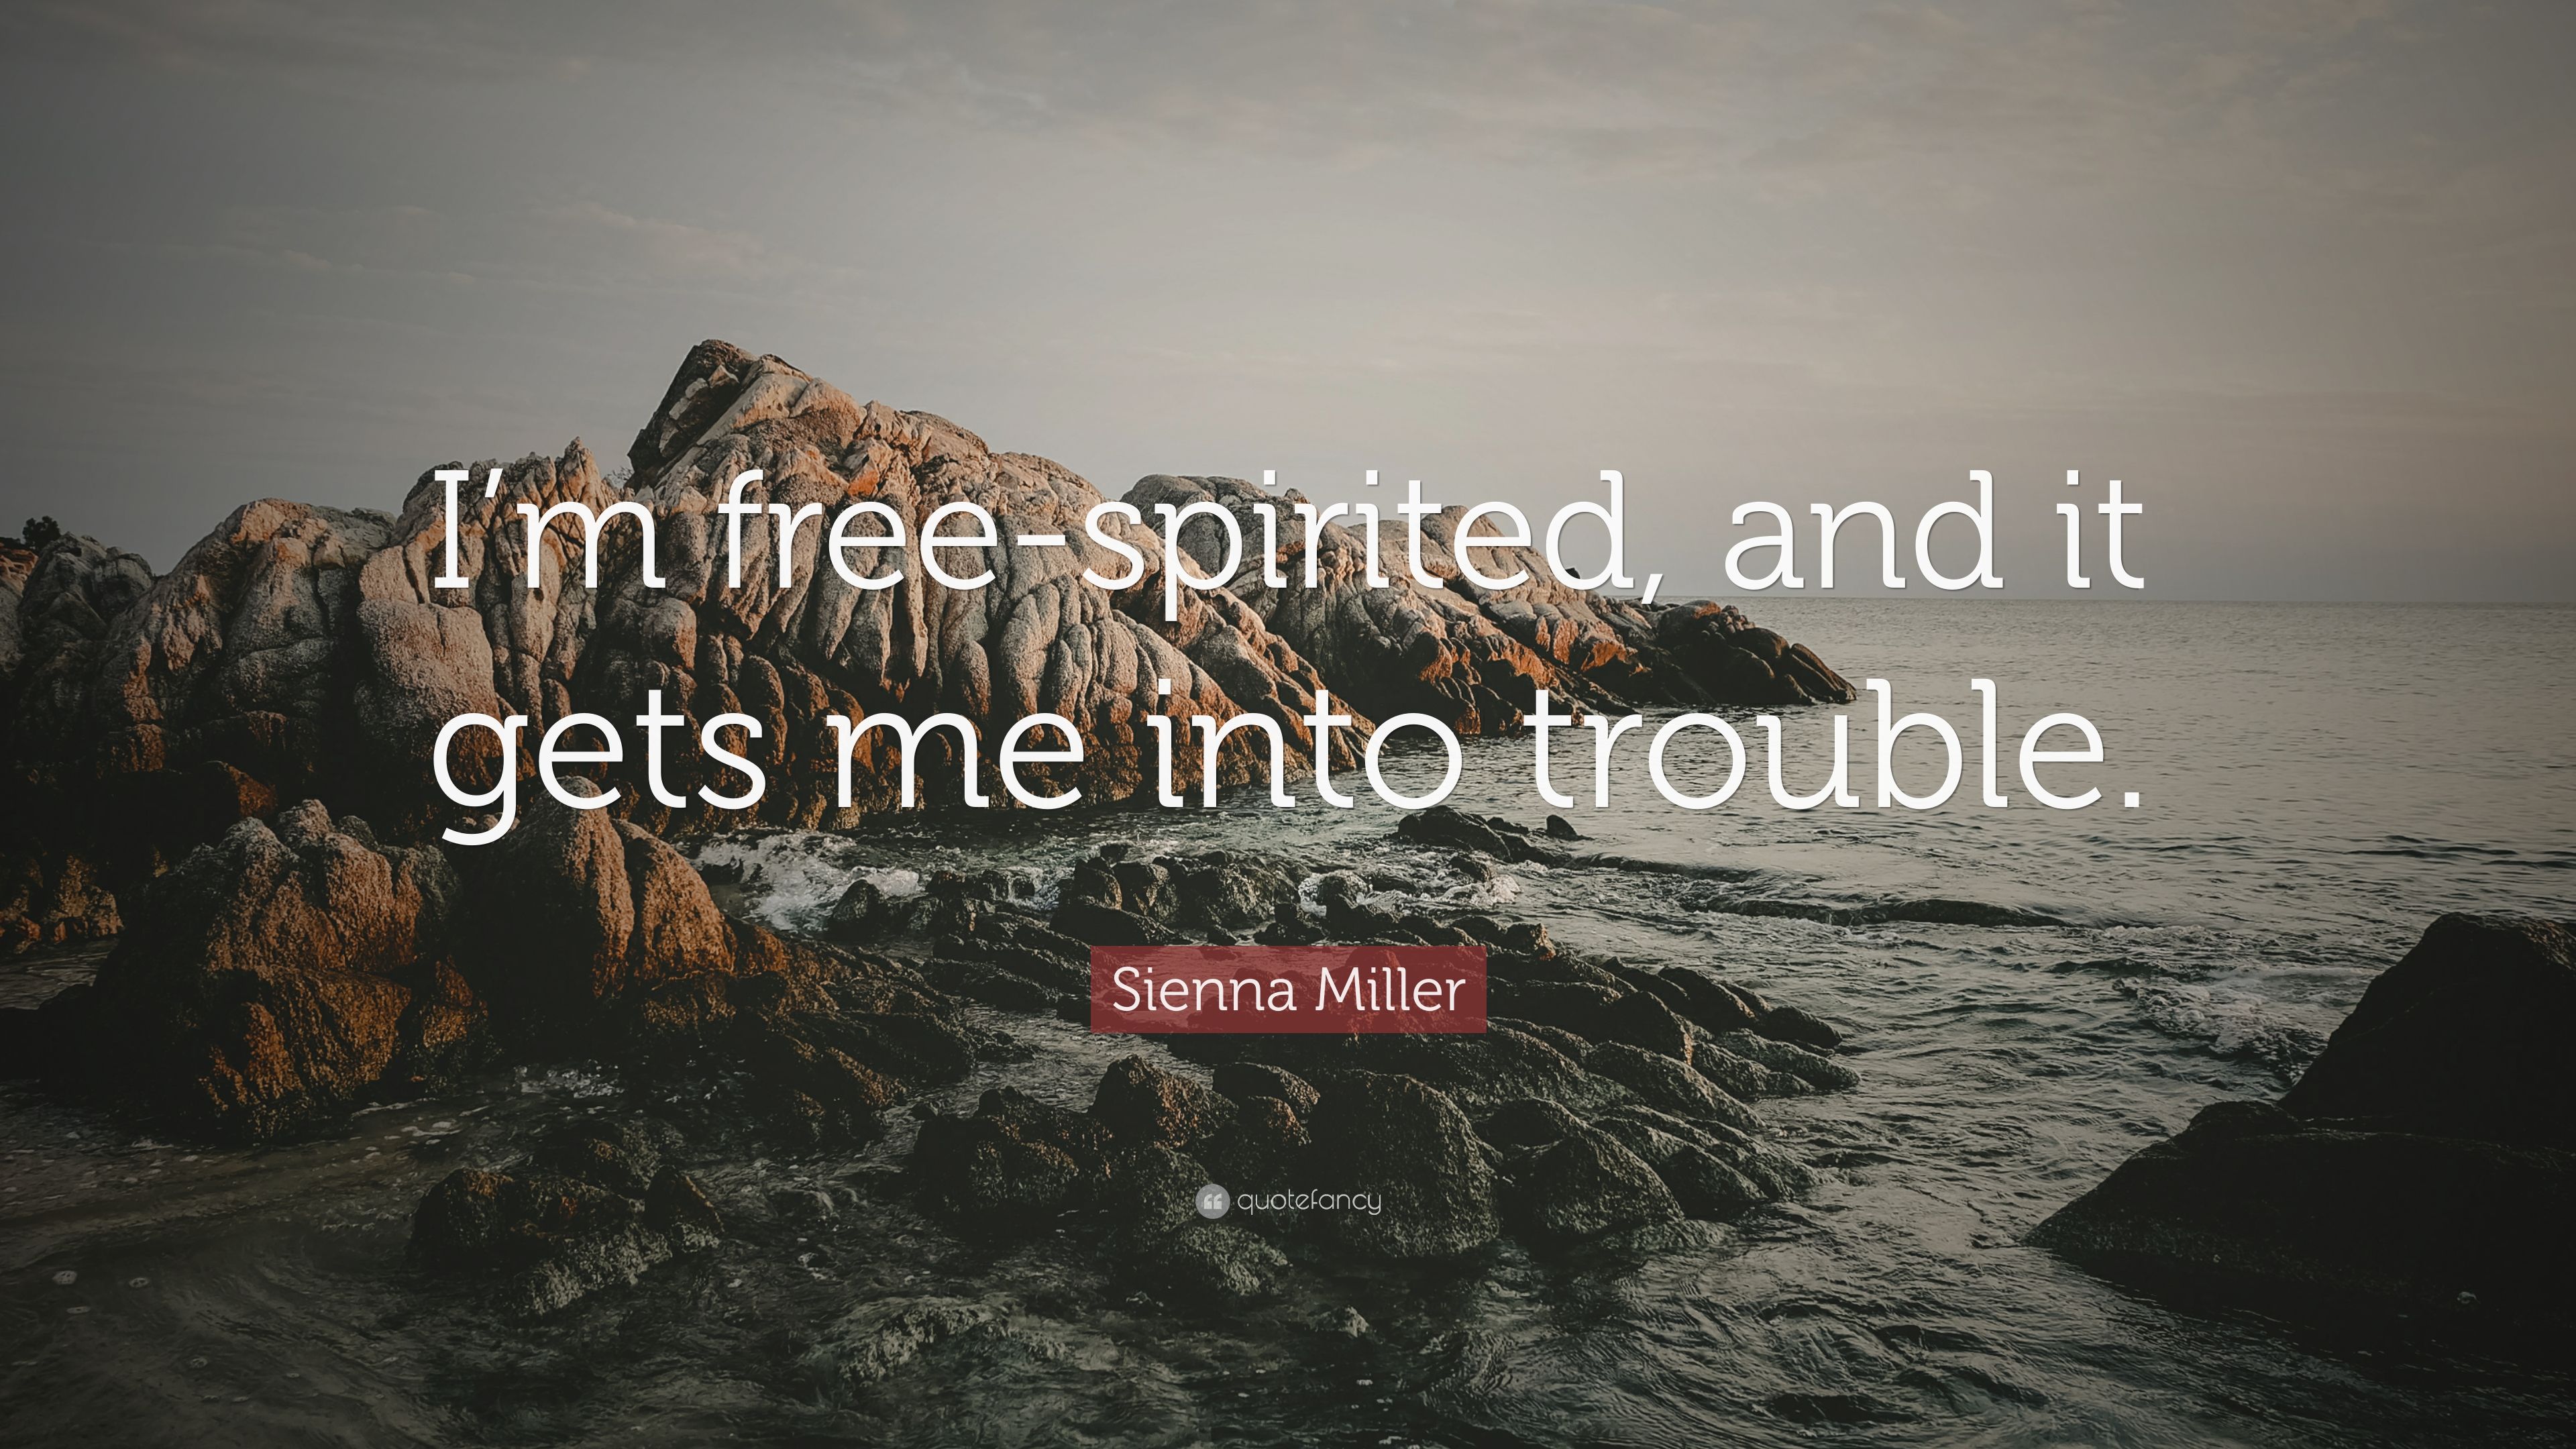 Sienna Miller Quote: “I'm Free Spirited, And It Gets Me Into Trouble.” (7 Wallpaper)